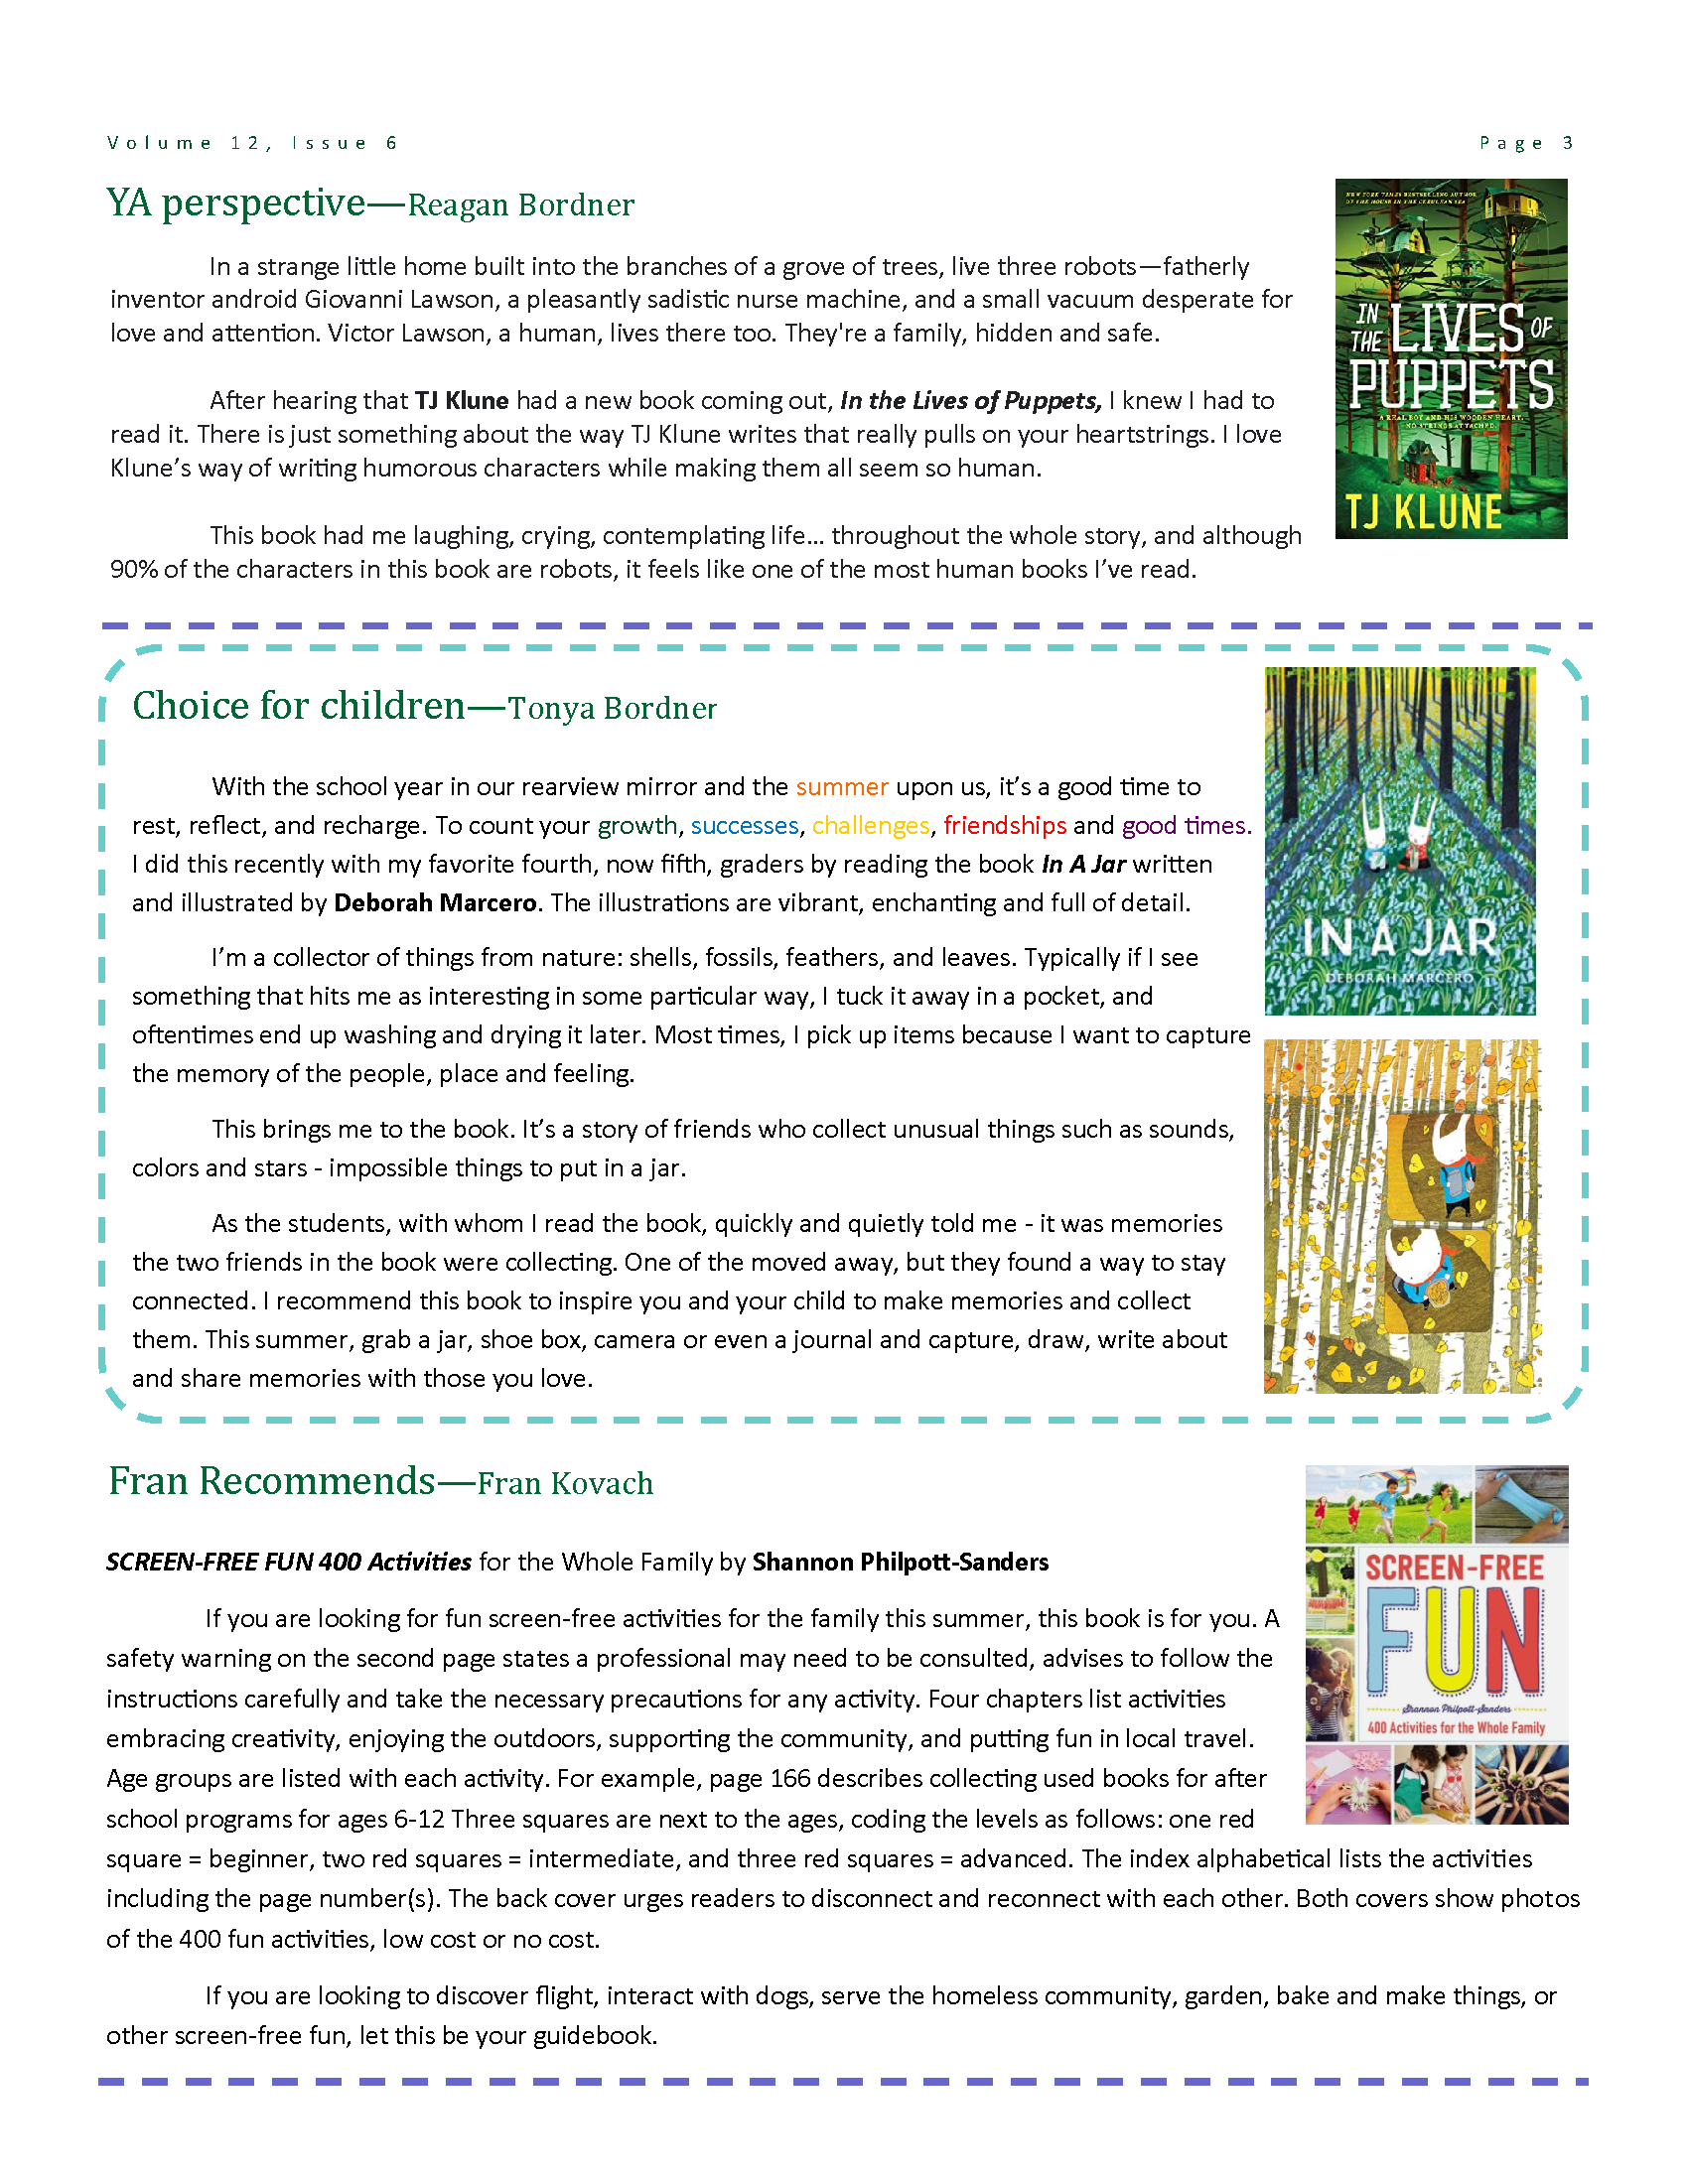 Page 3: Image of the newsletter and all content is made available in the PDF version, link at the top of this page.